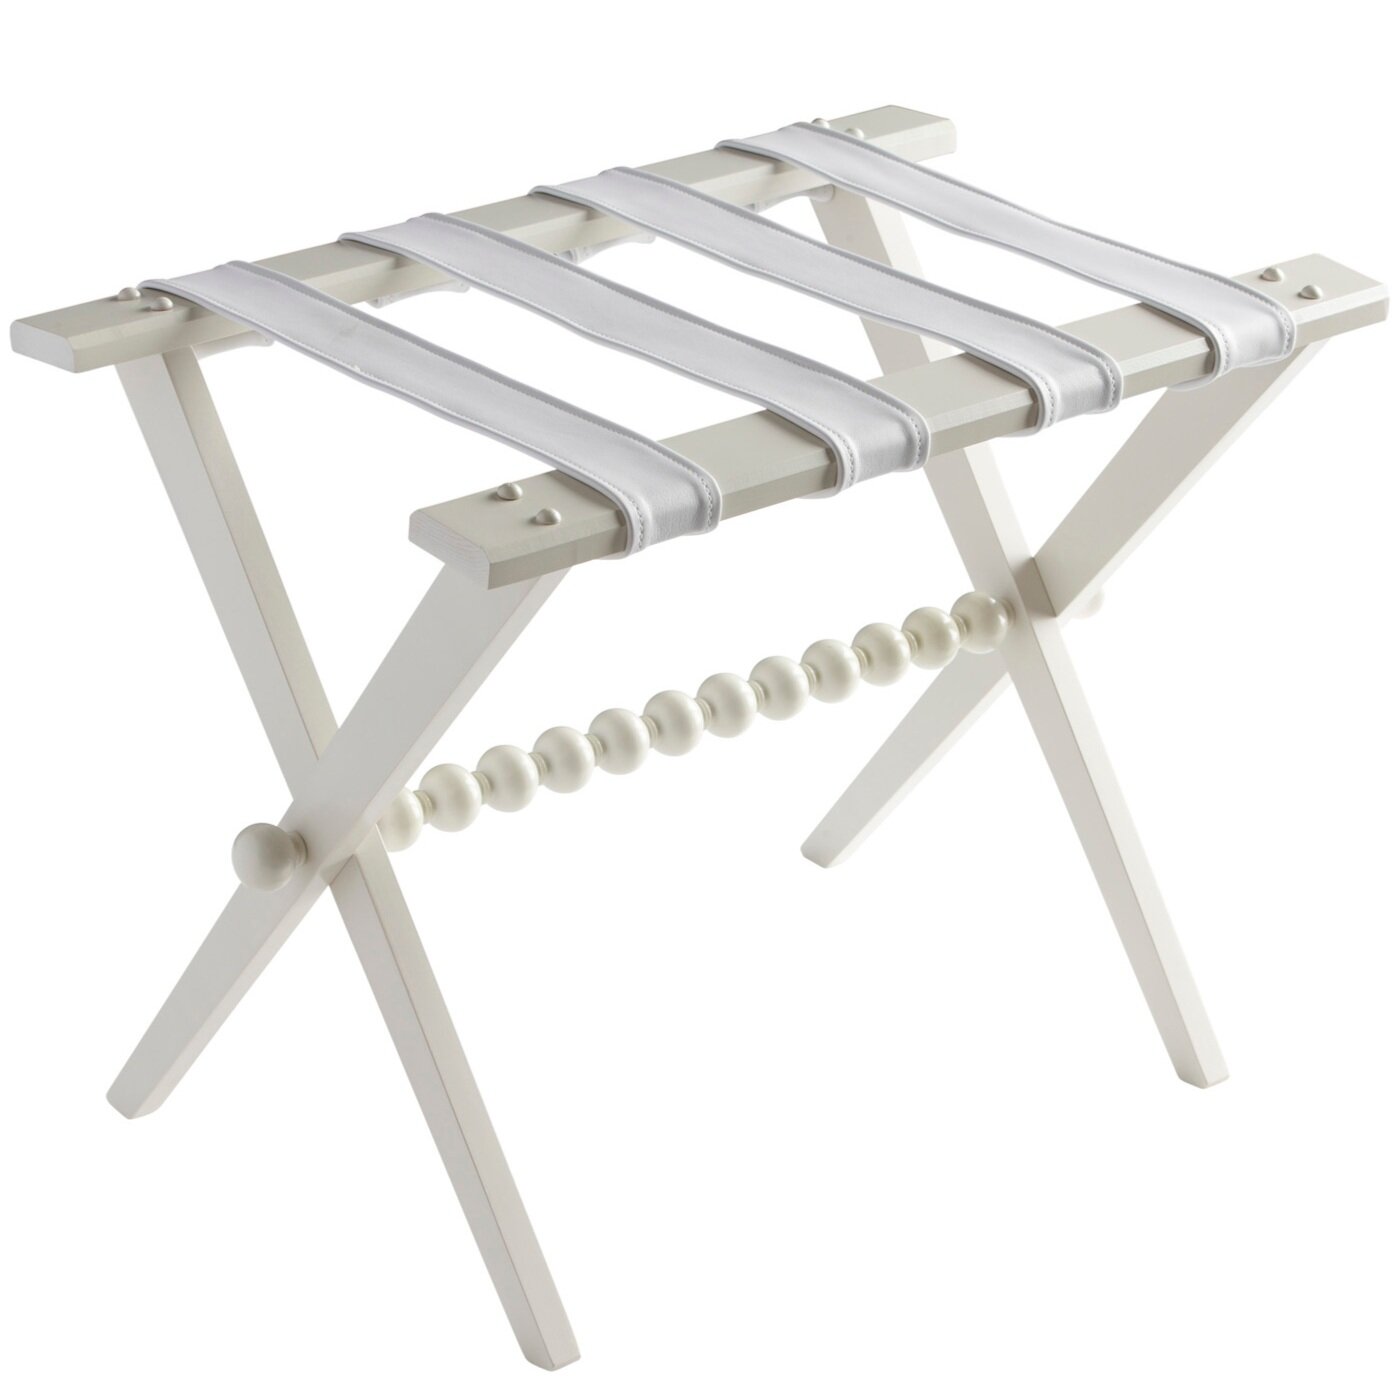 Square Tubing Wholesale Hotel Products MLR_SQ_BS_GR Brushed Stainless Steel Luggage Rack Gray Straps